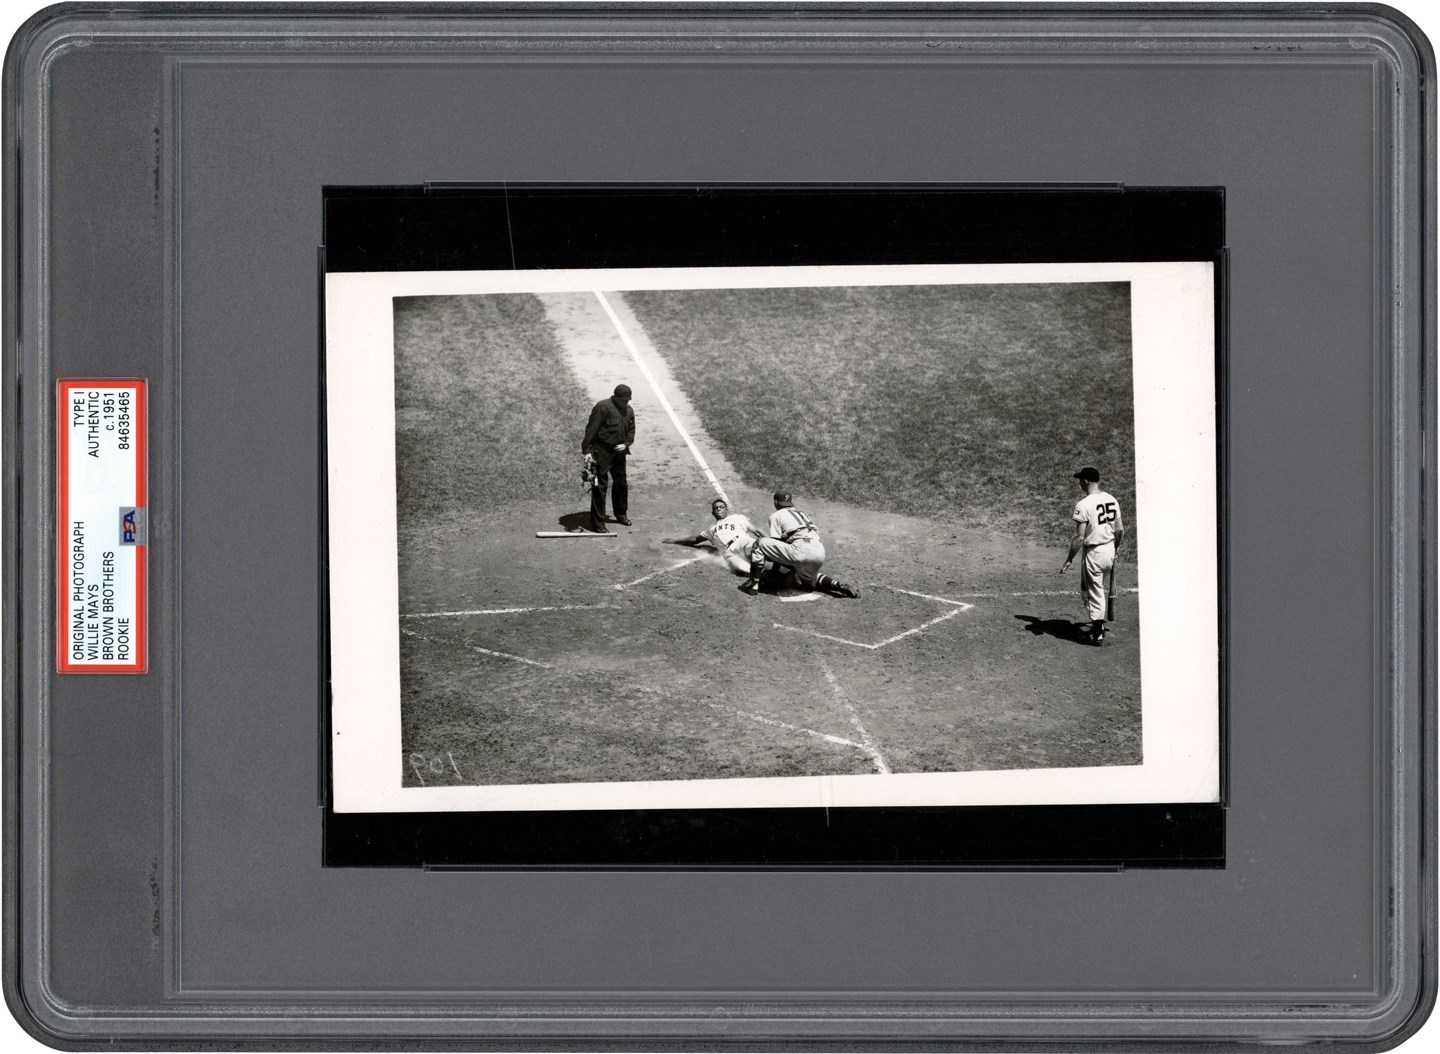 The Brown Brothers Photograph Collection - 1951 Willie Mays Rookie Photograph - Sliding Into Home (PSA Type I)